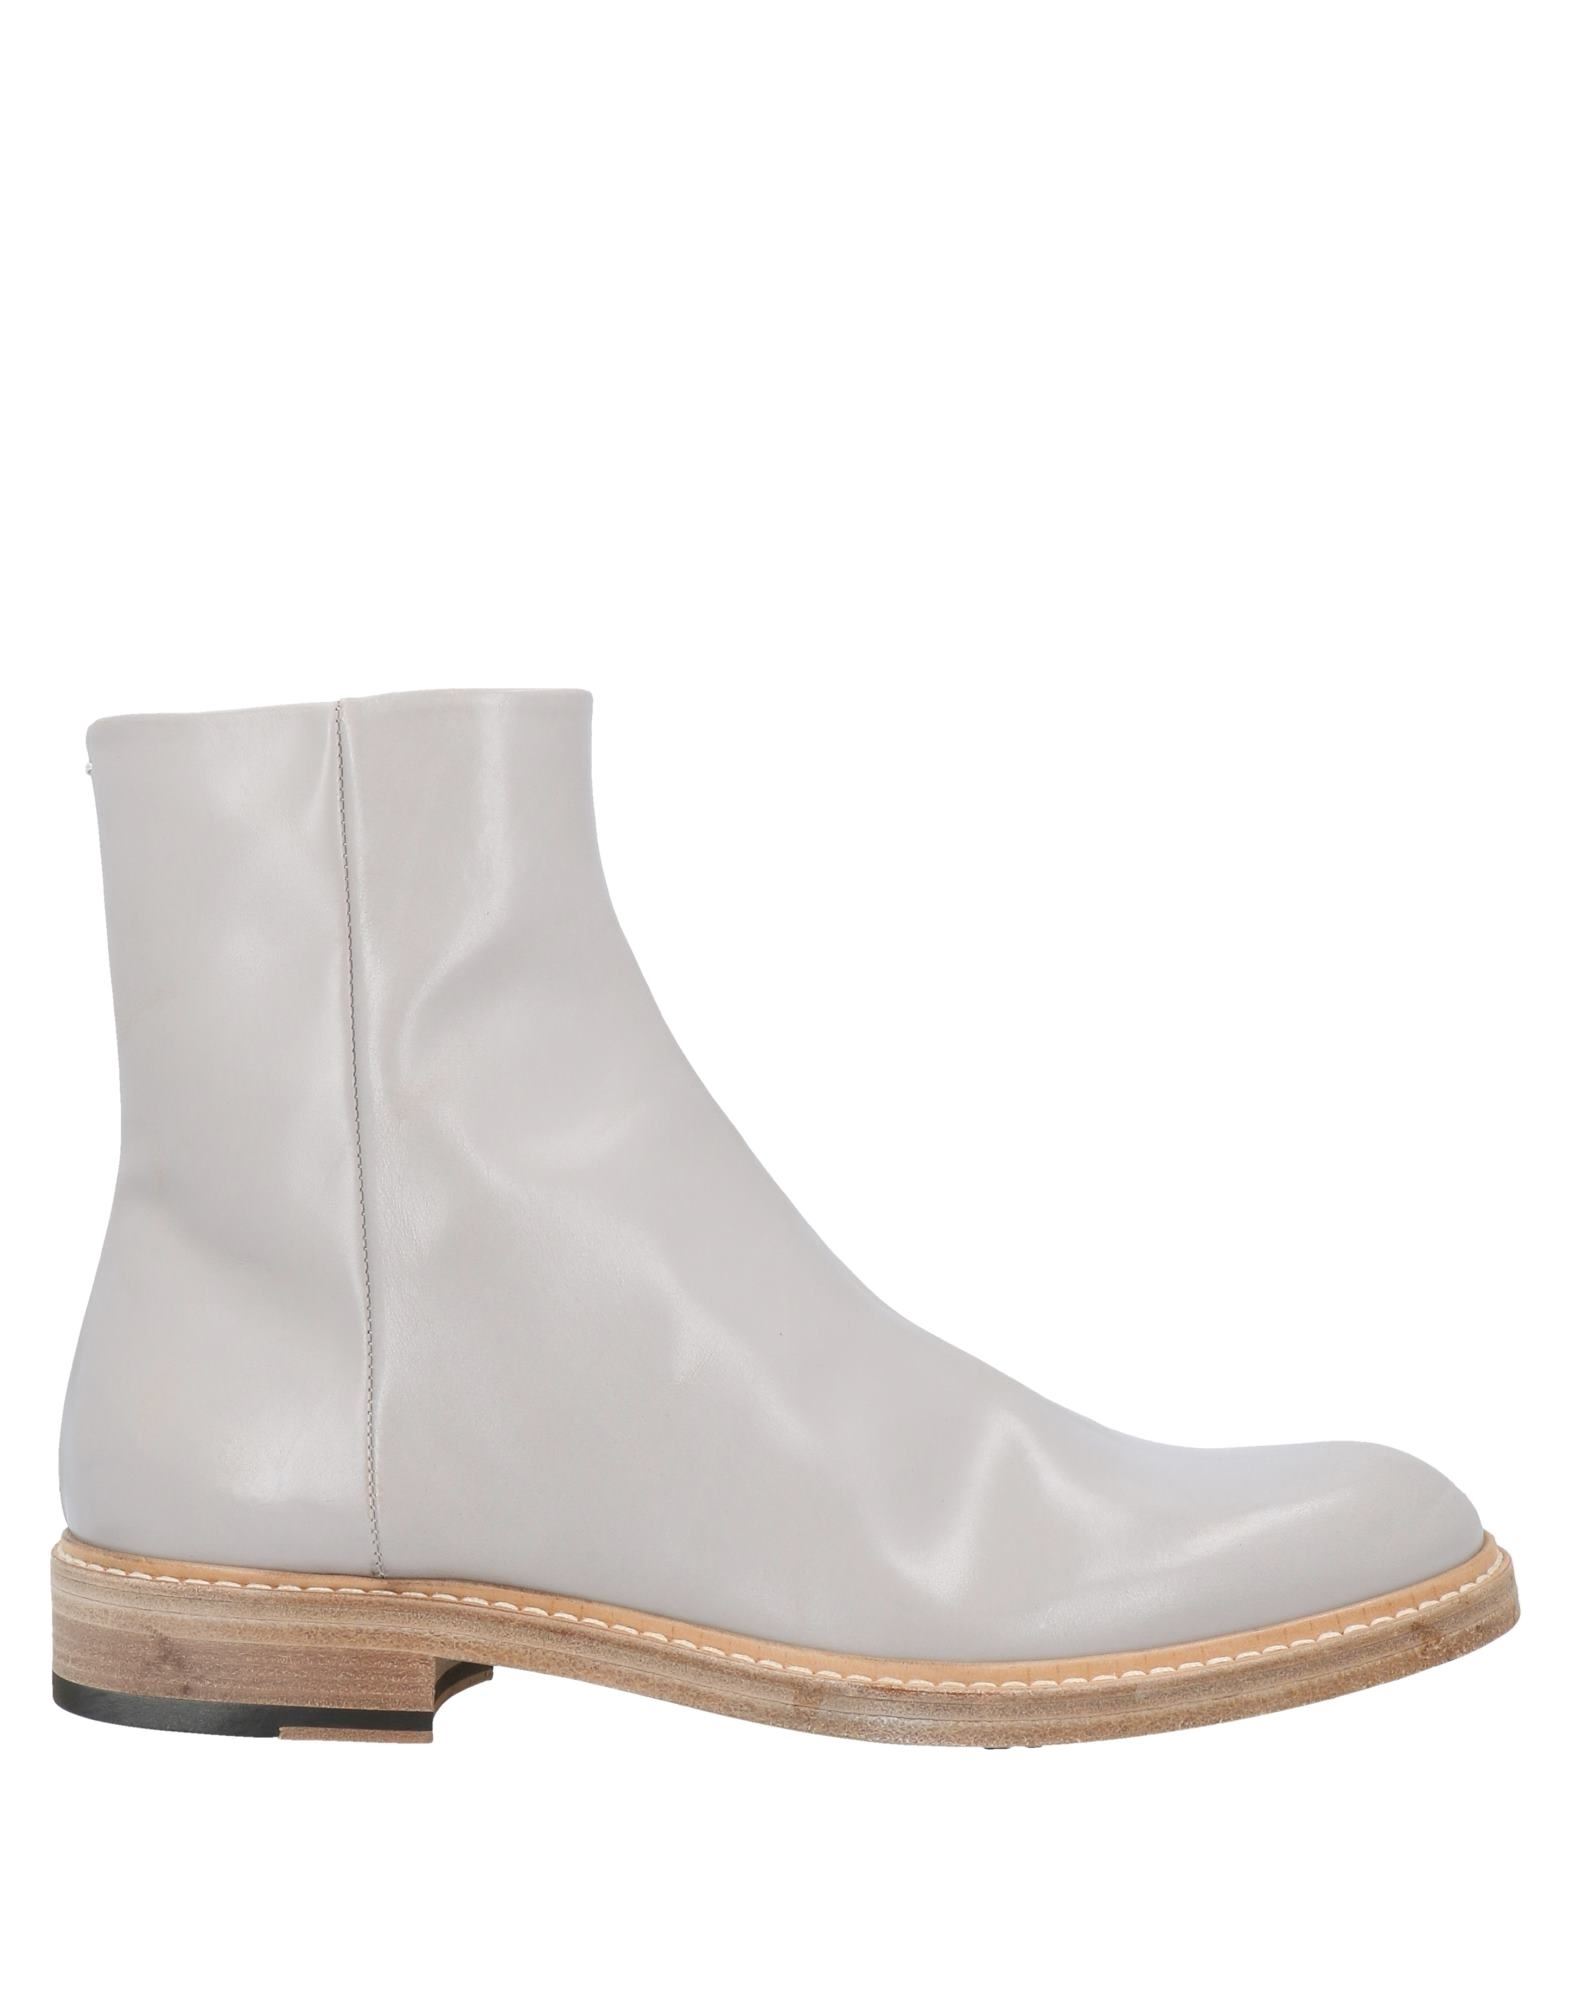 Maison Margiela Ankle Boots In Light Grey